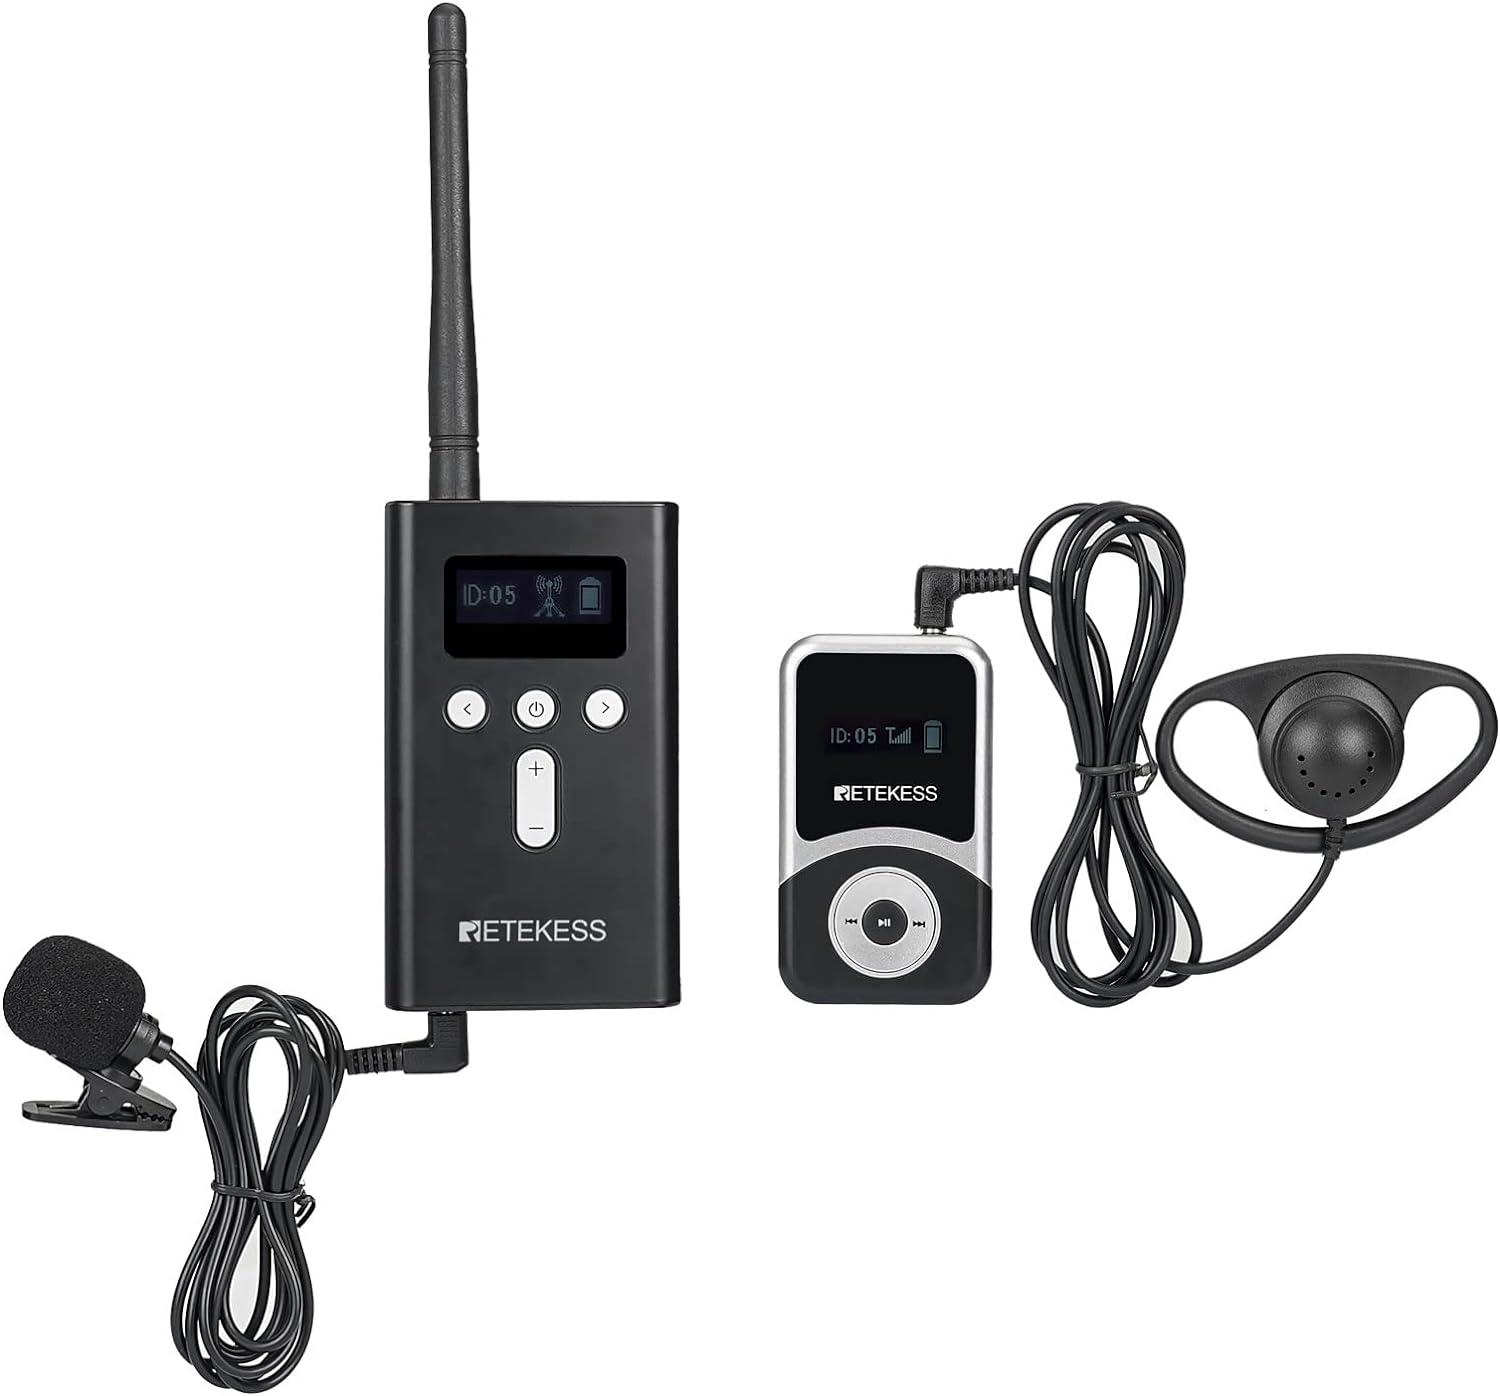 Retekess T130S Upgrade Wireless Tour Guide System, New Version of